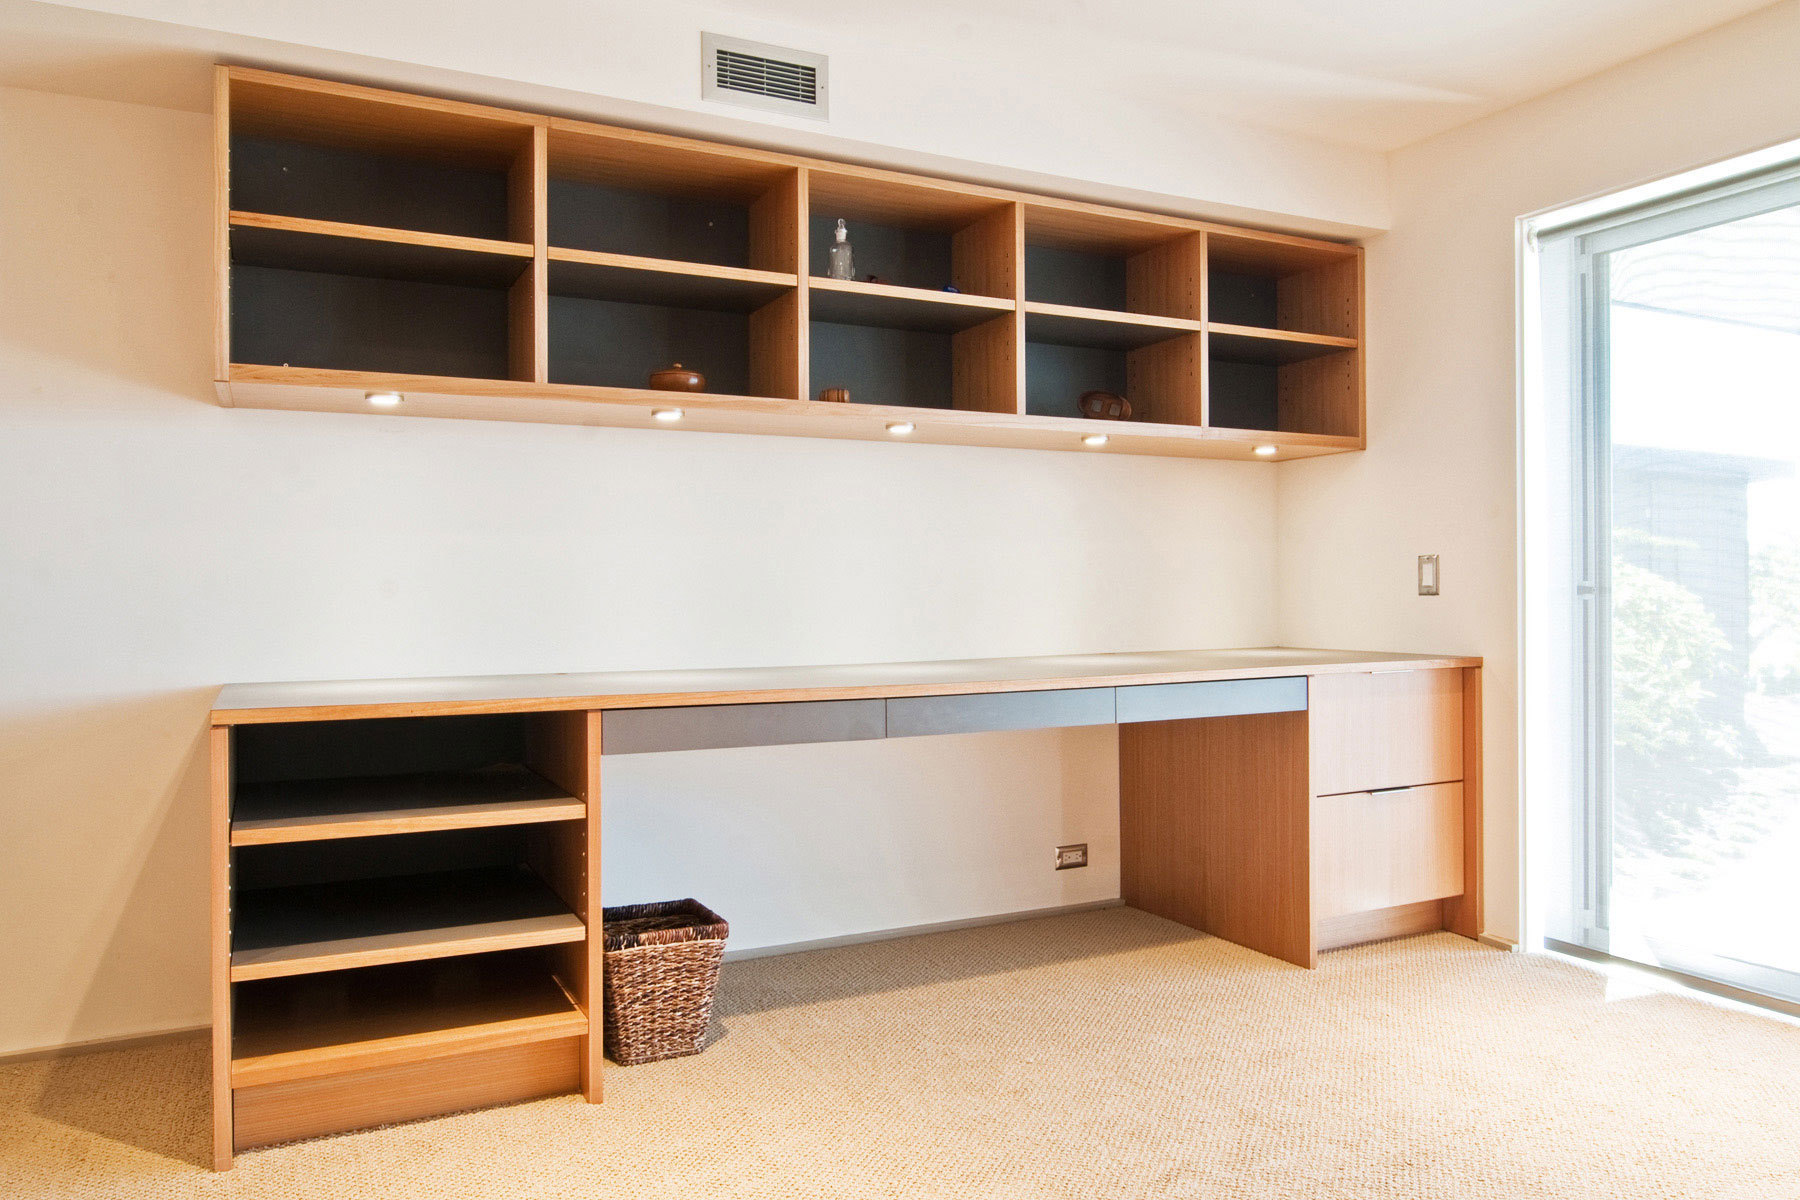 Organize yourself with office cabinets designinyou URHGFMV